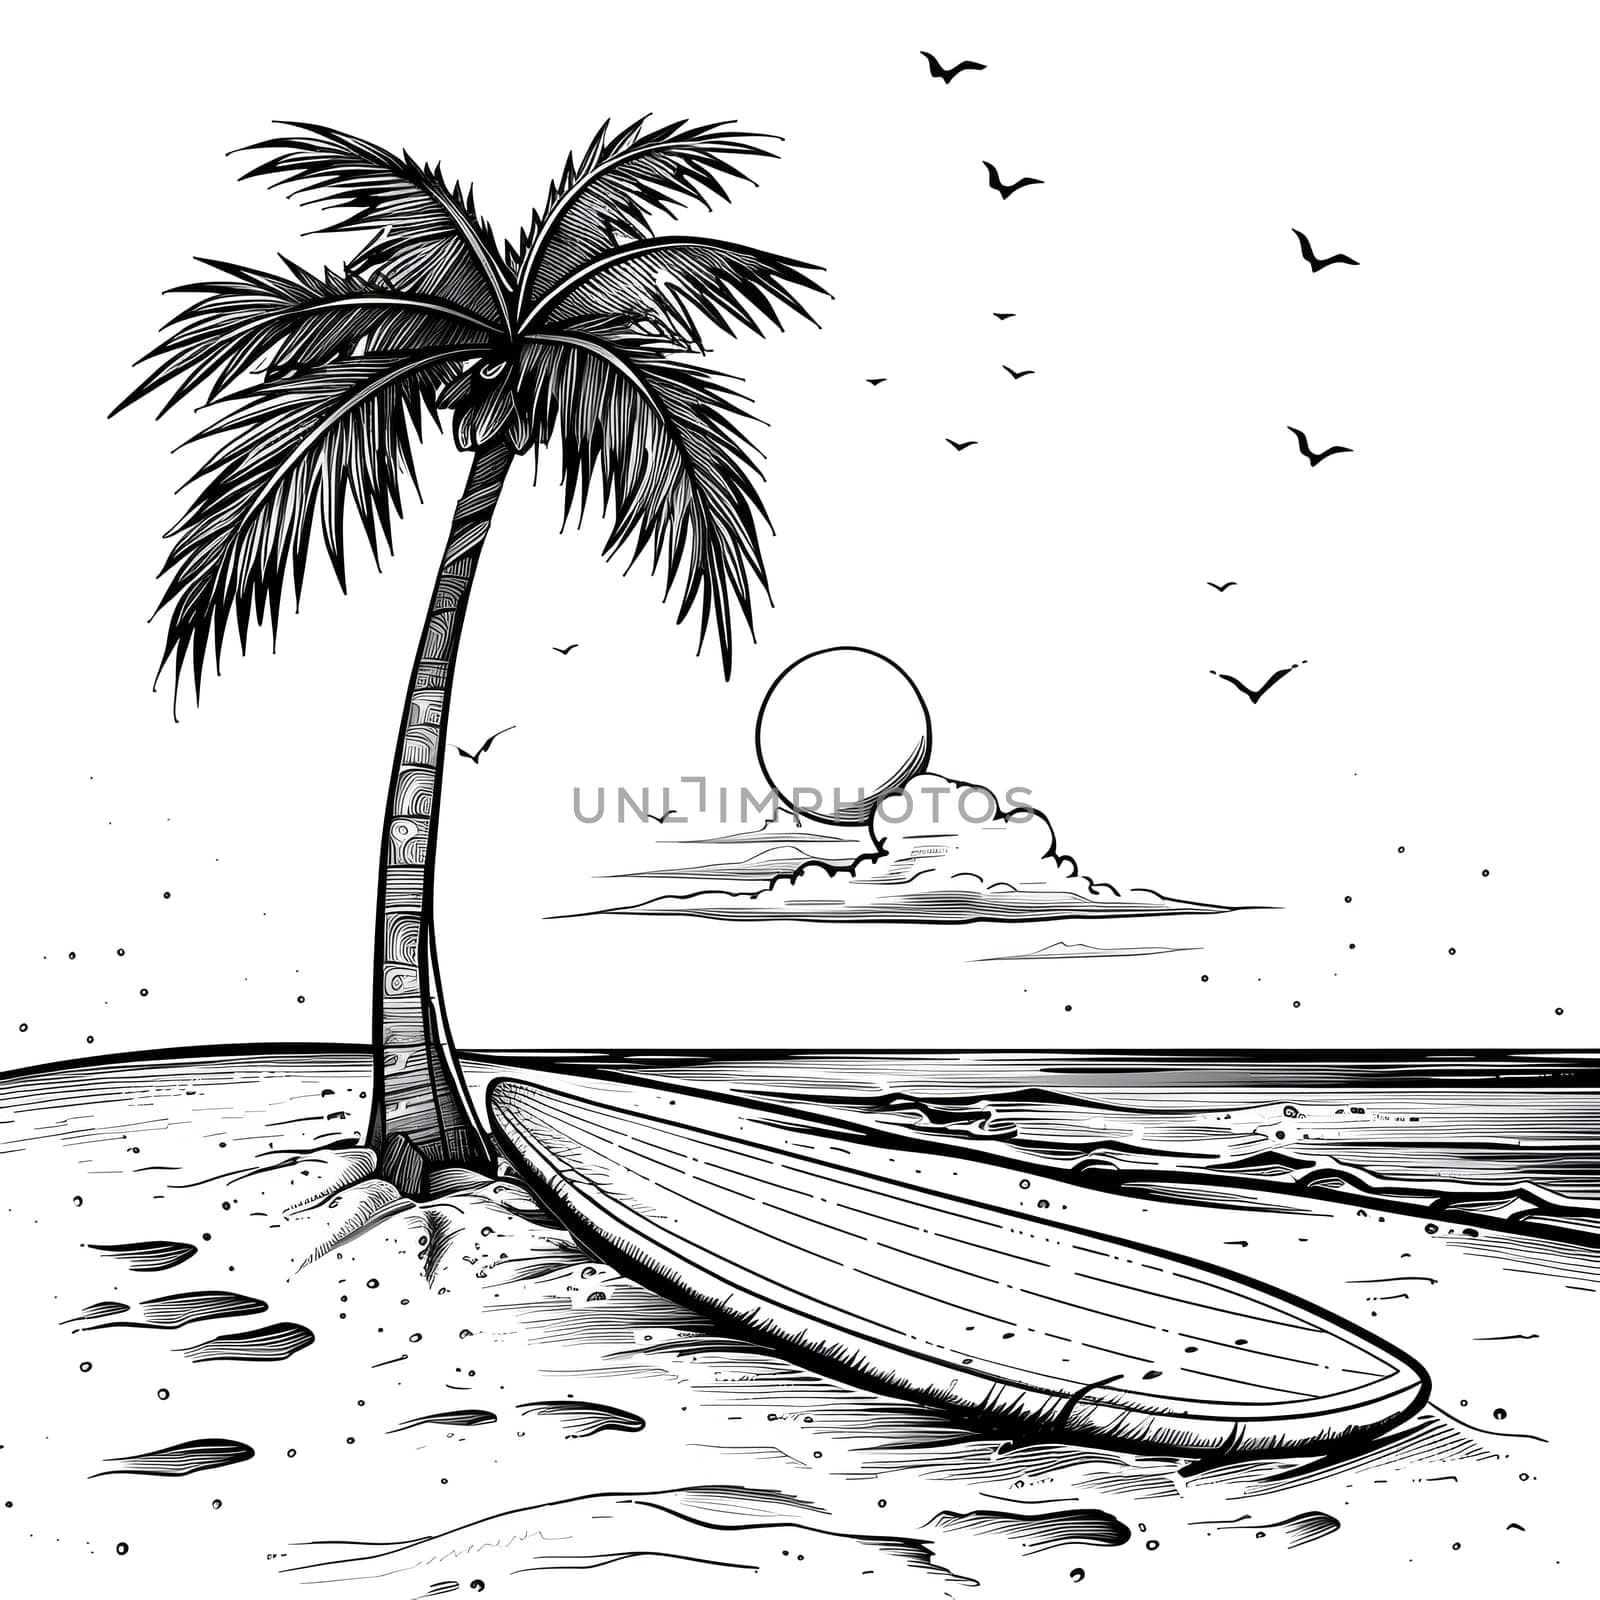 Blackandwhite painting of a palm tree and surfboard on a beach by Nadtochiy